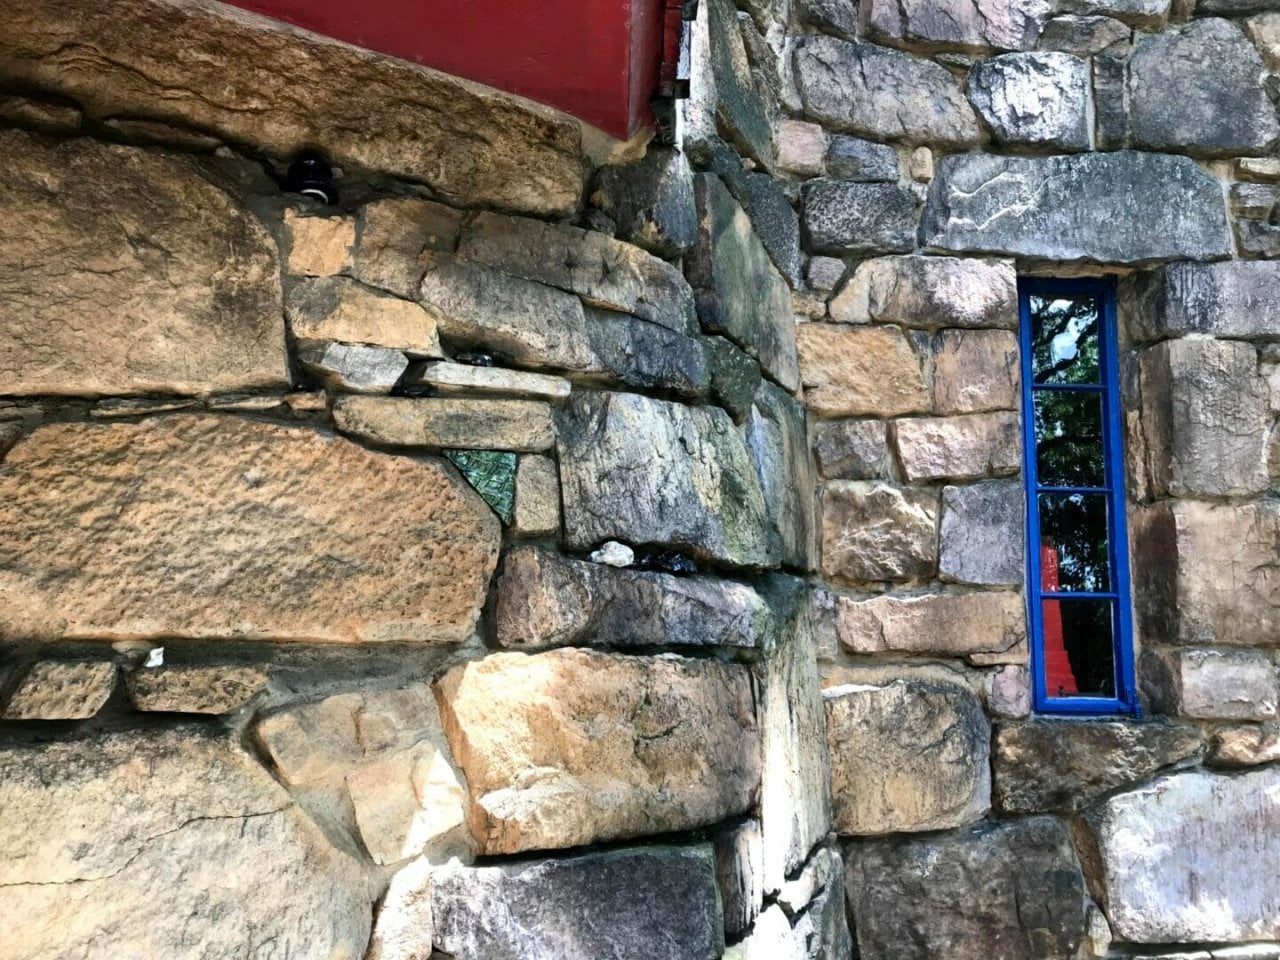 A stone wall with a tall narrow, blue window towards the right. In the window we can see a bright red abstract sculpture.